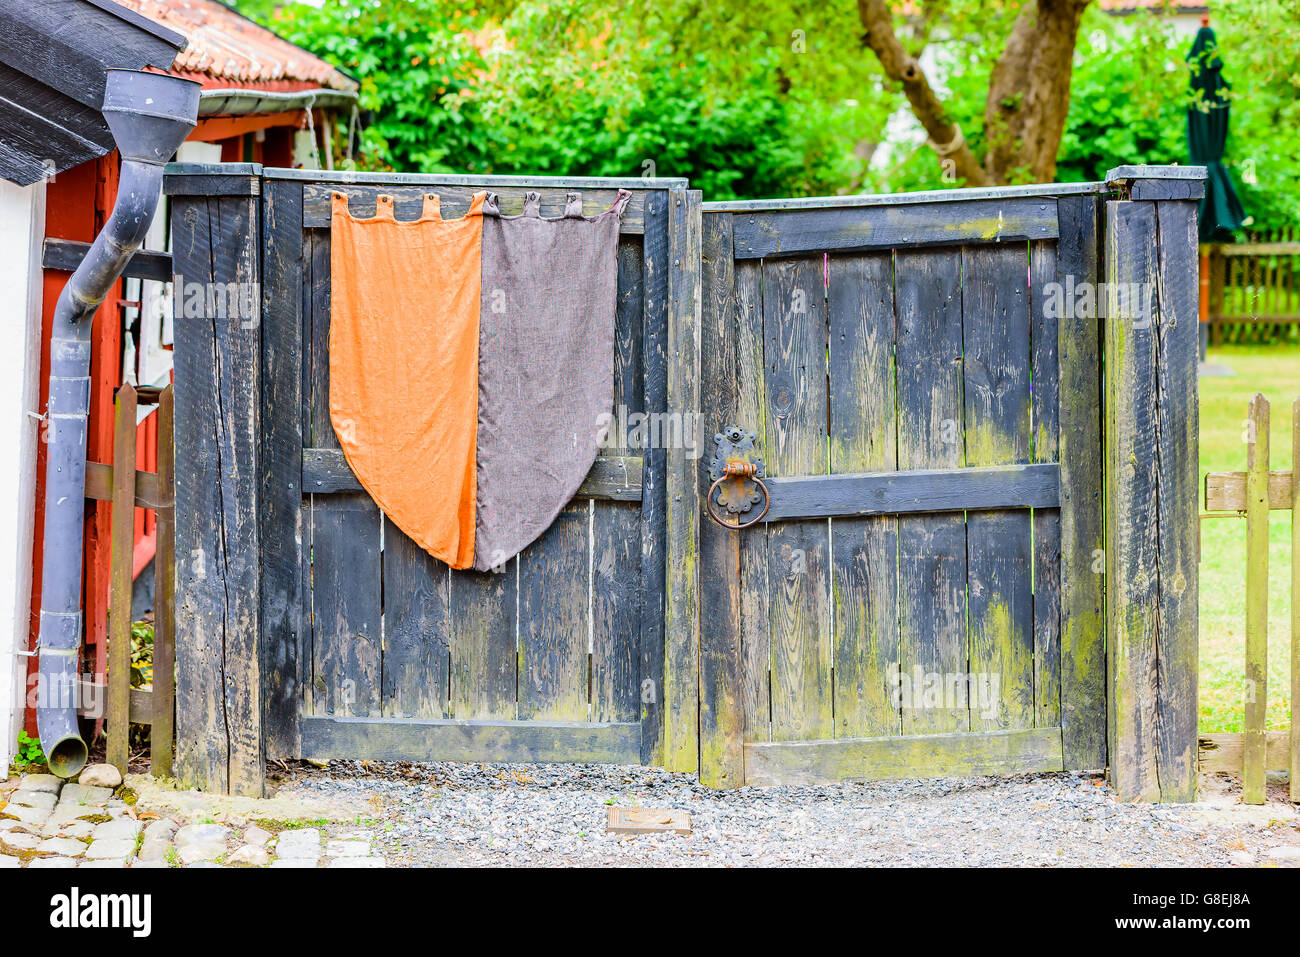 Black old wooden gate with vintage banner. Gate is closed and has a very old locking mechanism and handle. Stock Photo